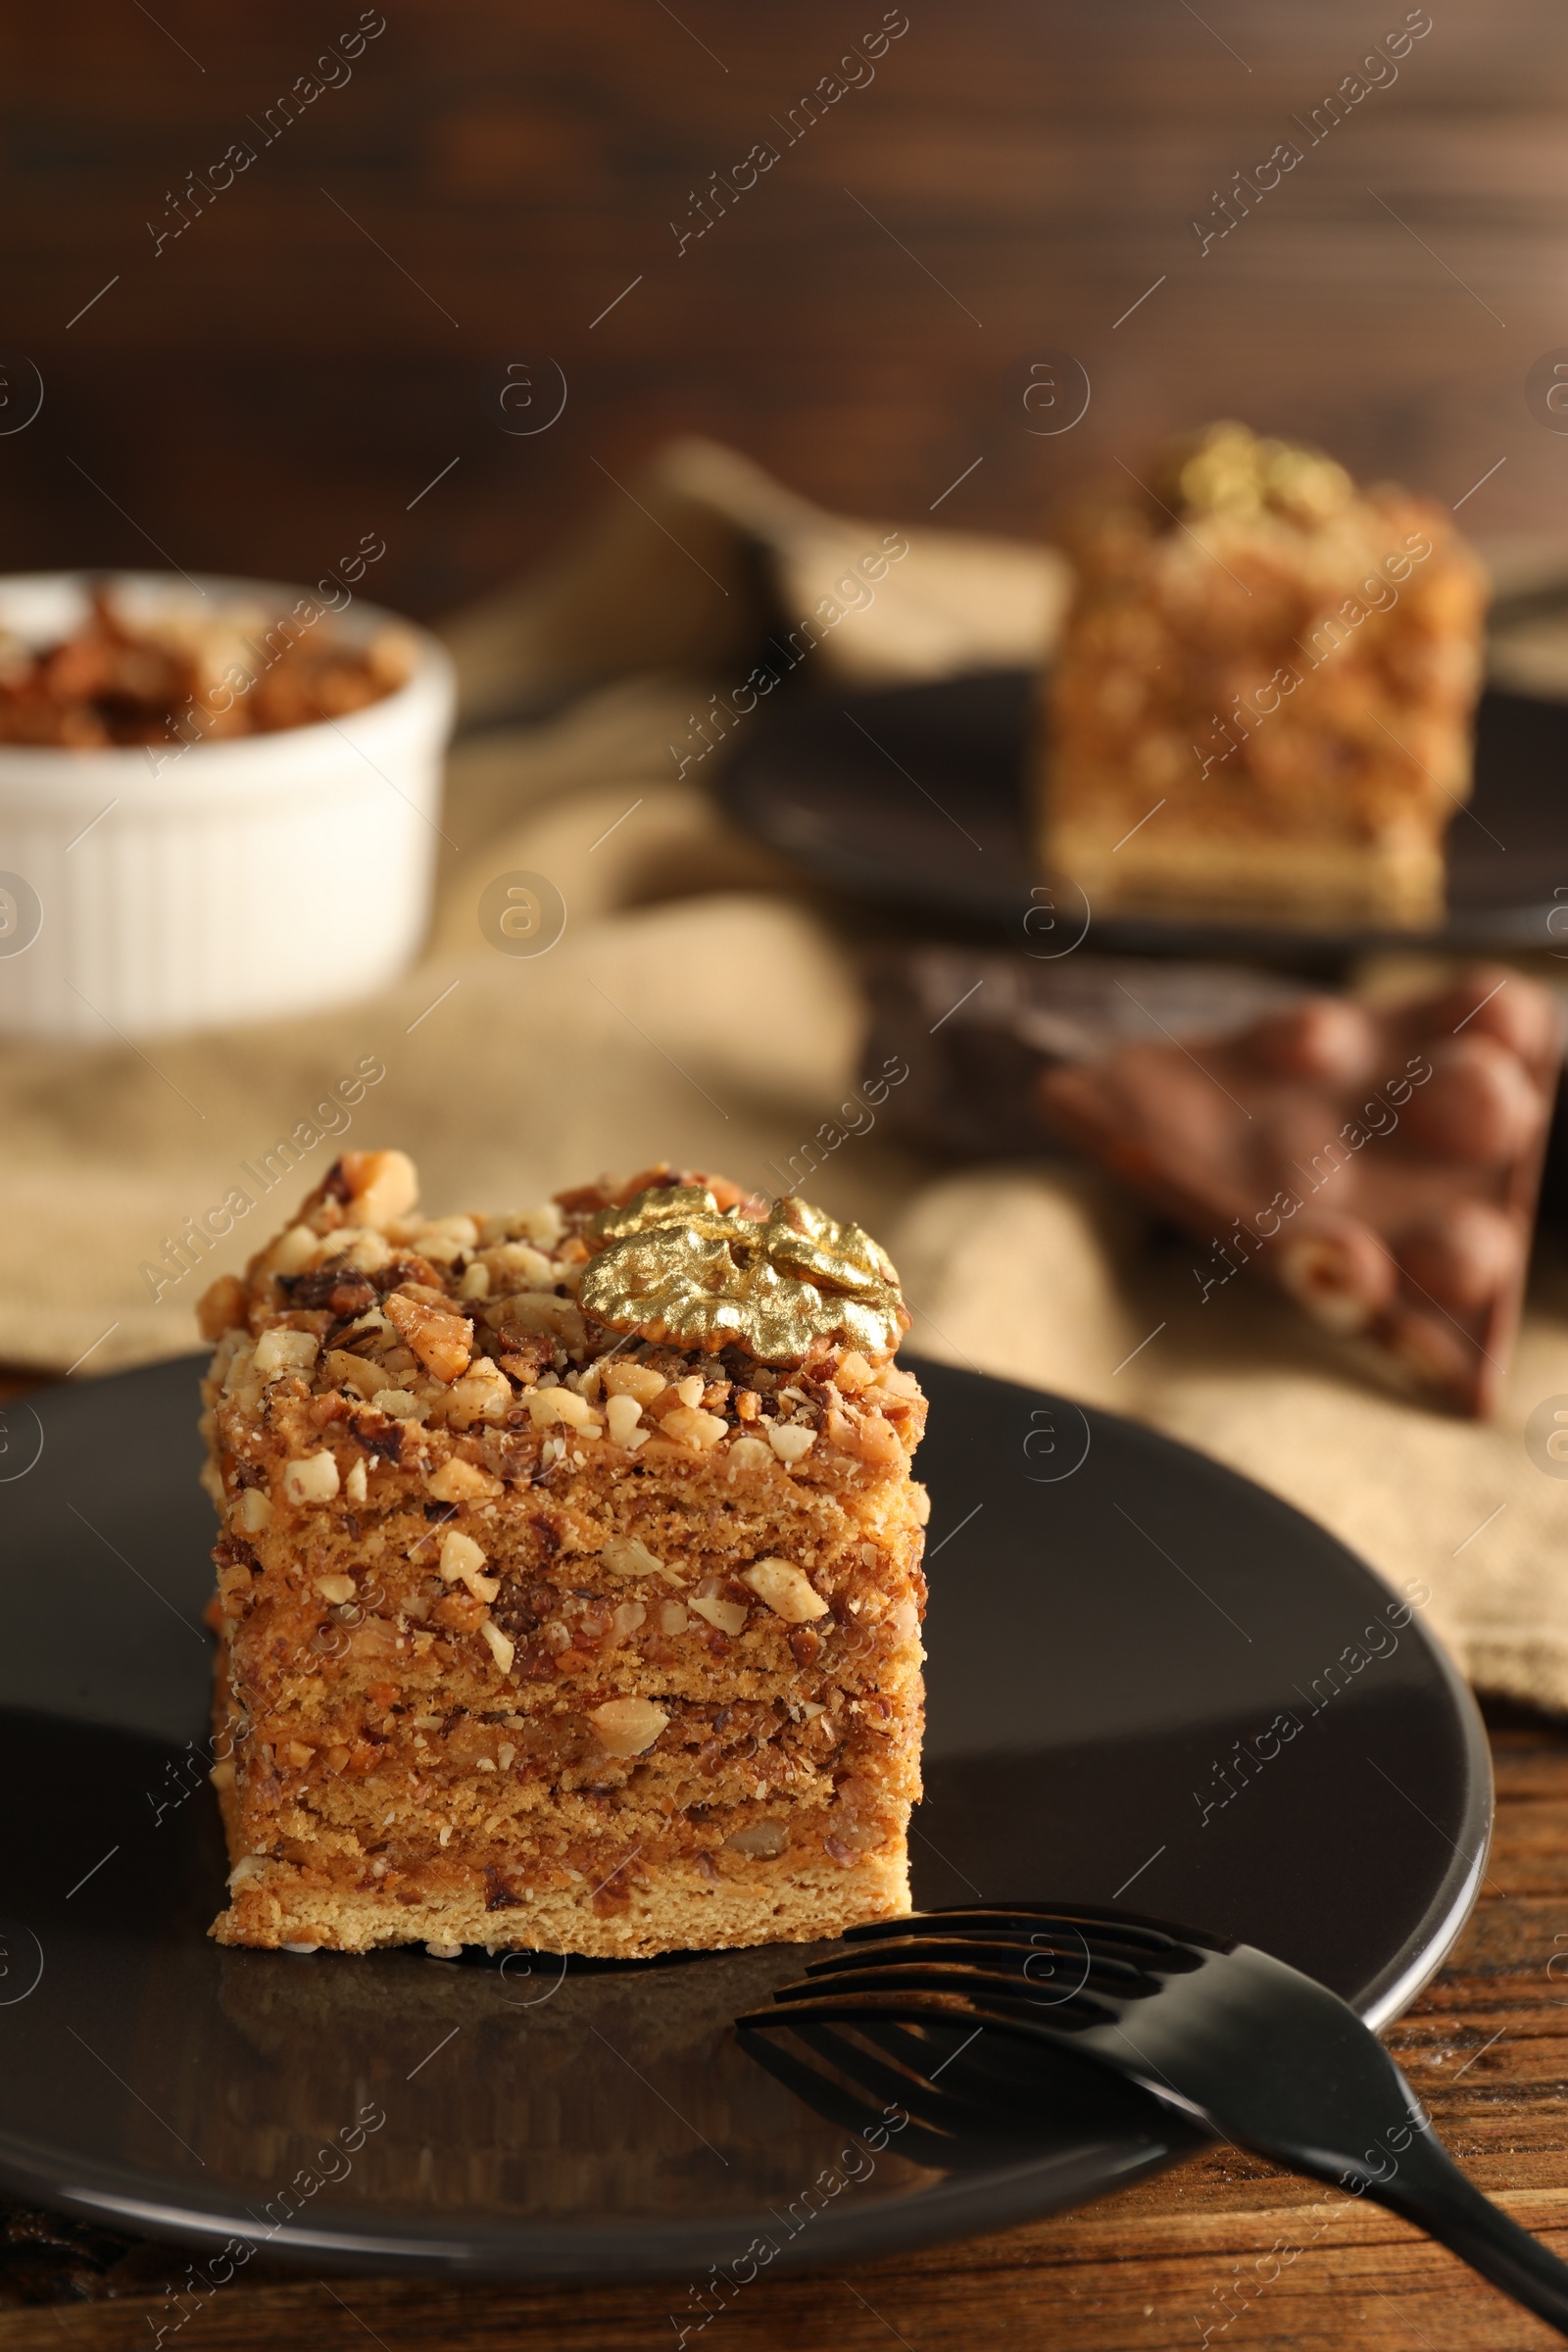 Photo of Piece of honey cake with walnuts and fork on plate, closeup